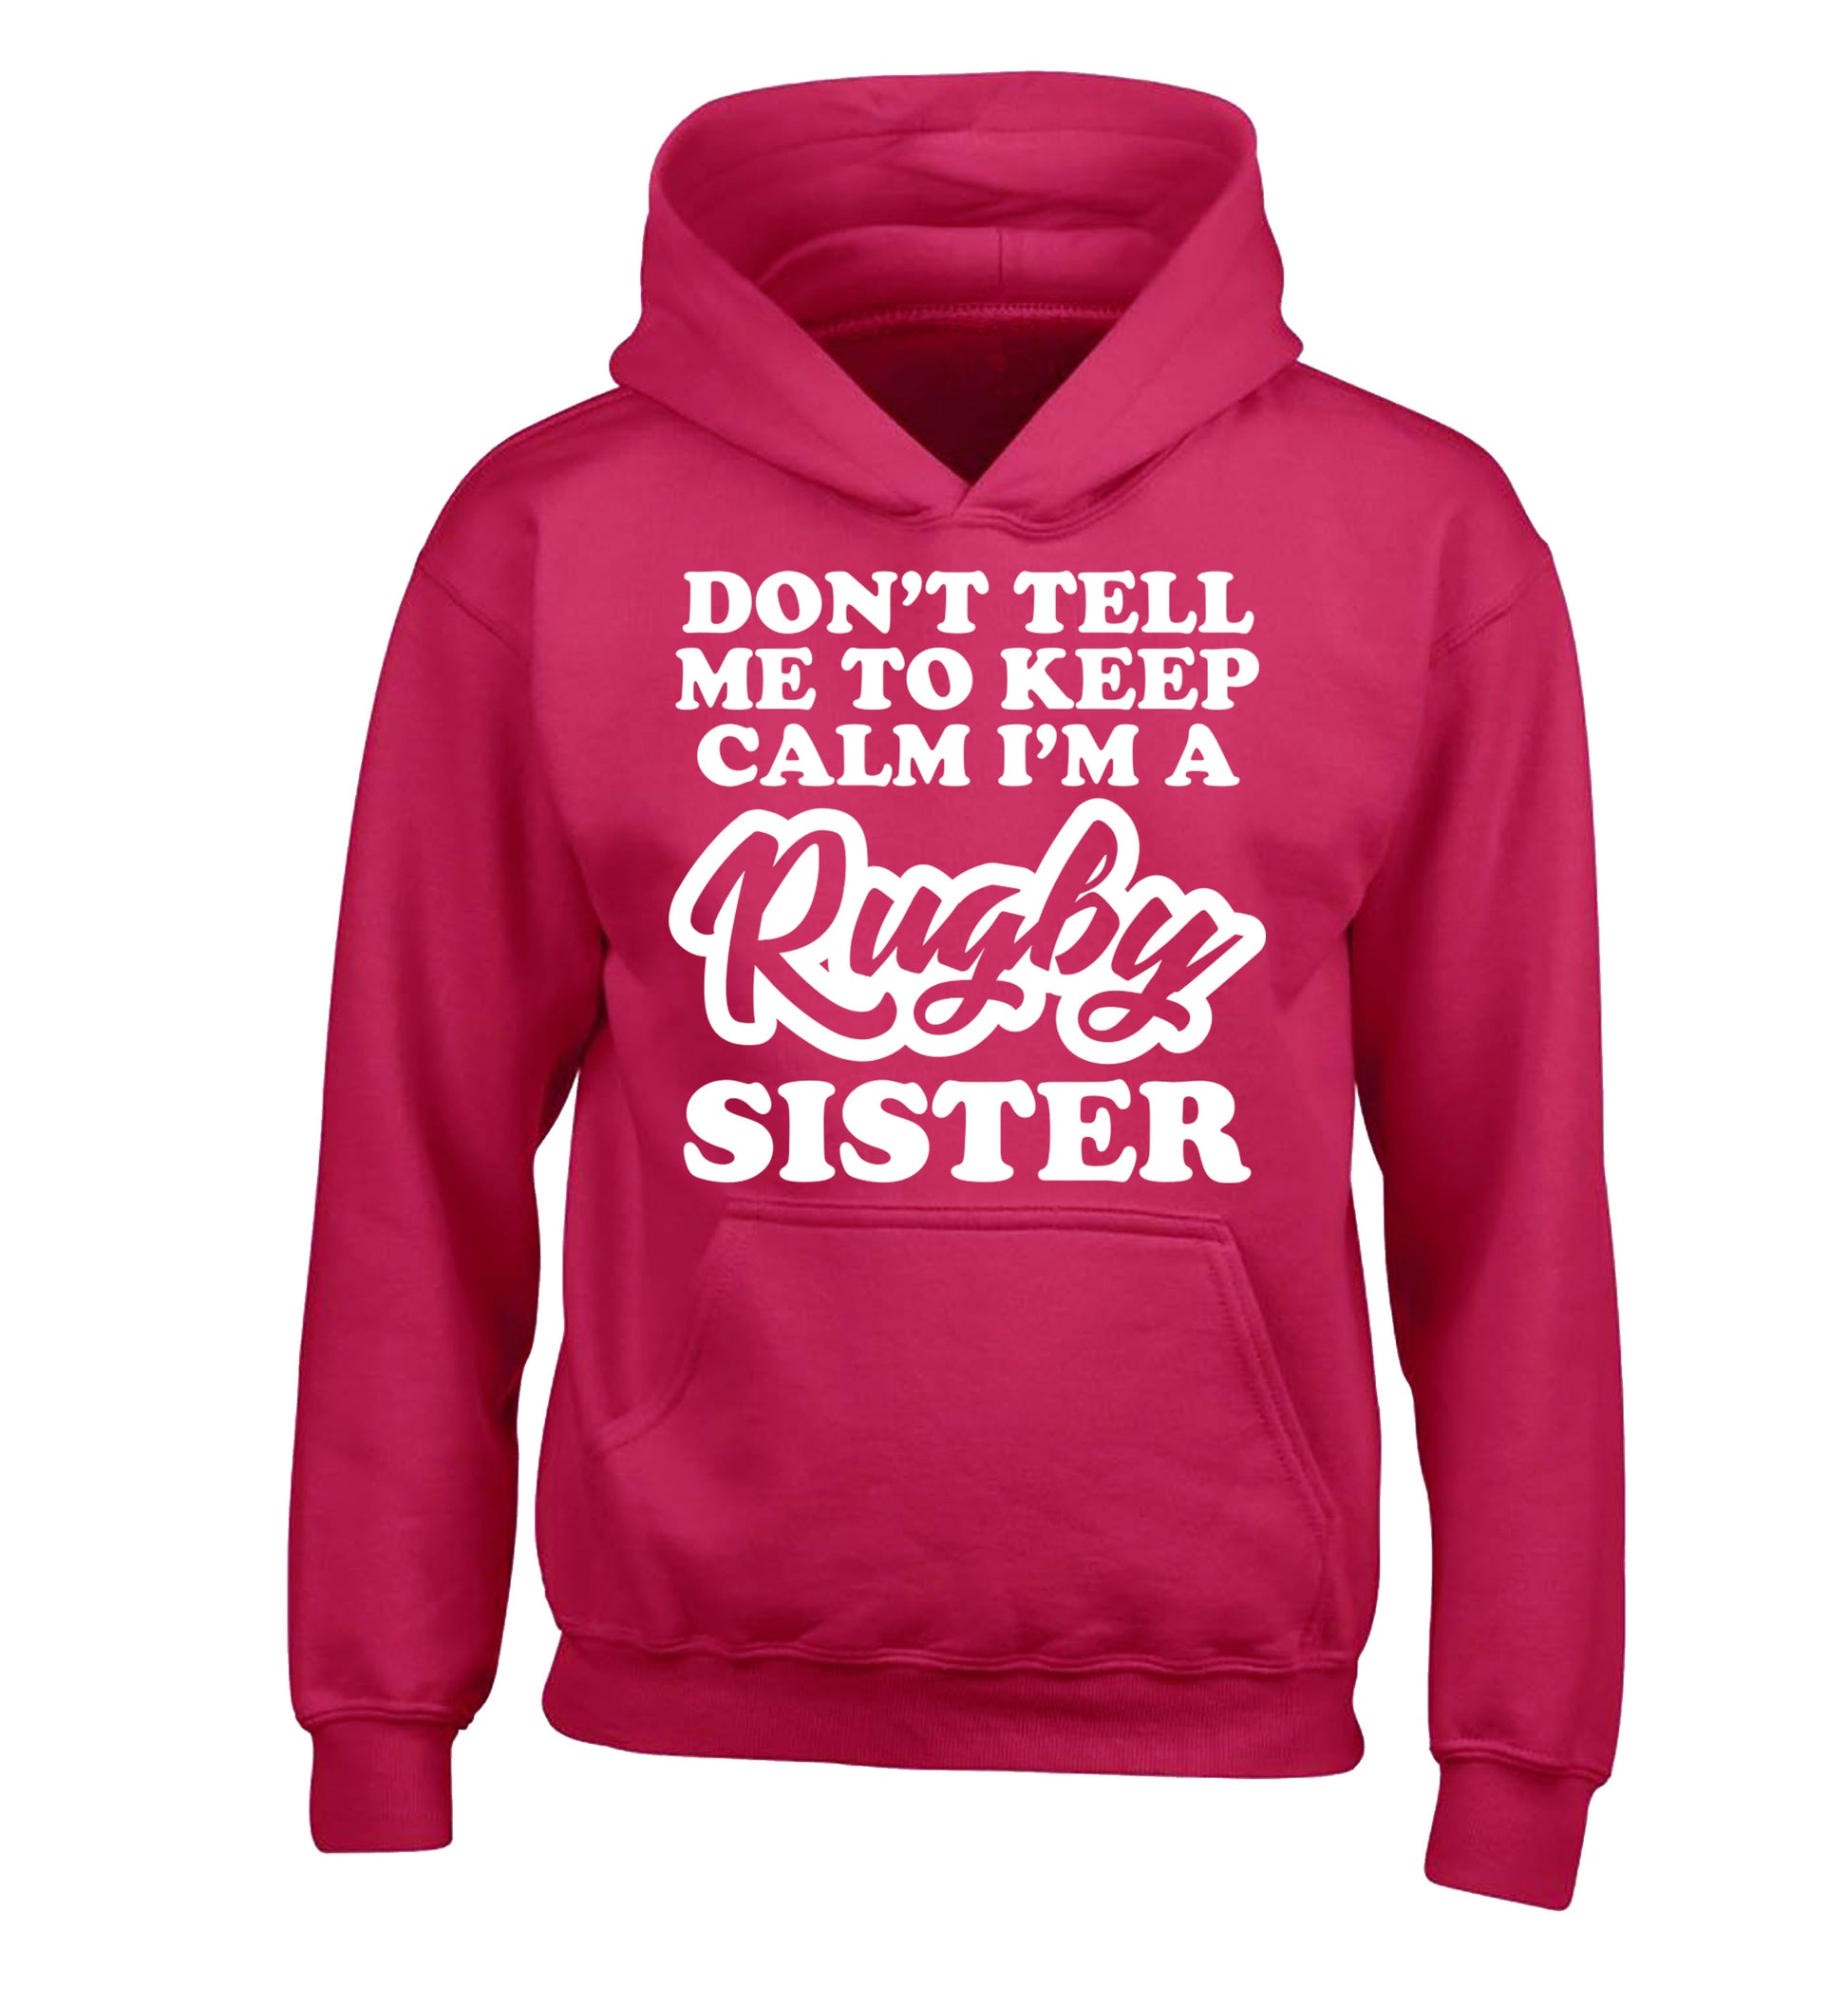 Don't tell me keep calm I'm a rugby sister children's pink hoodie 12-13 Years